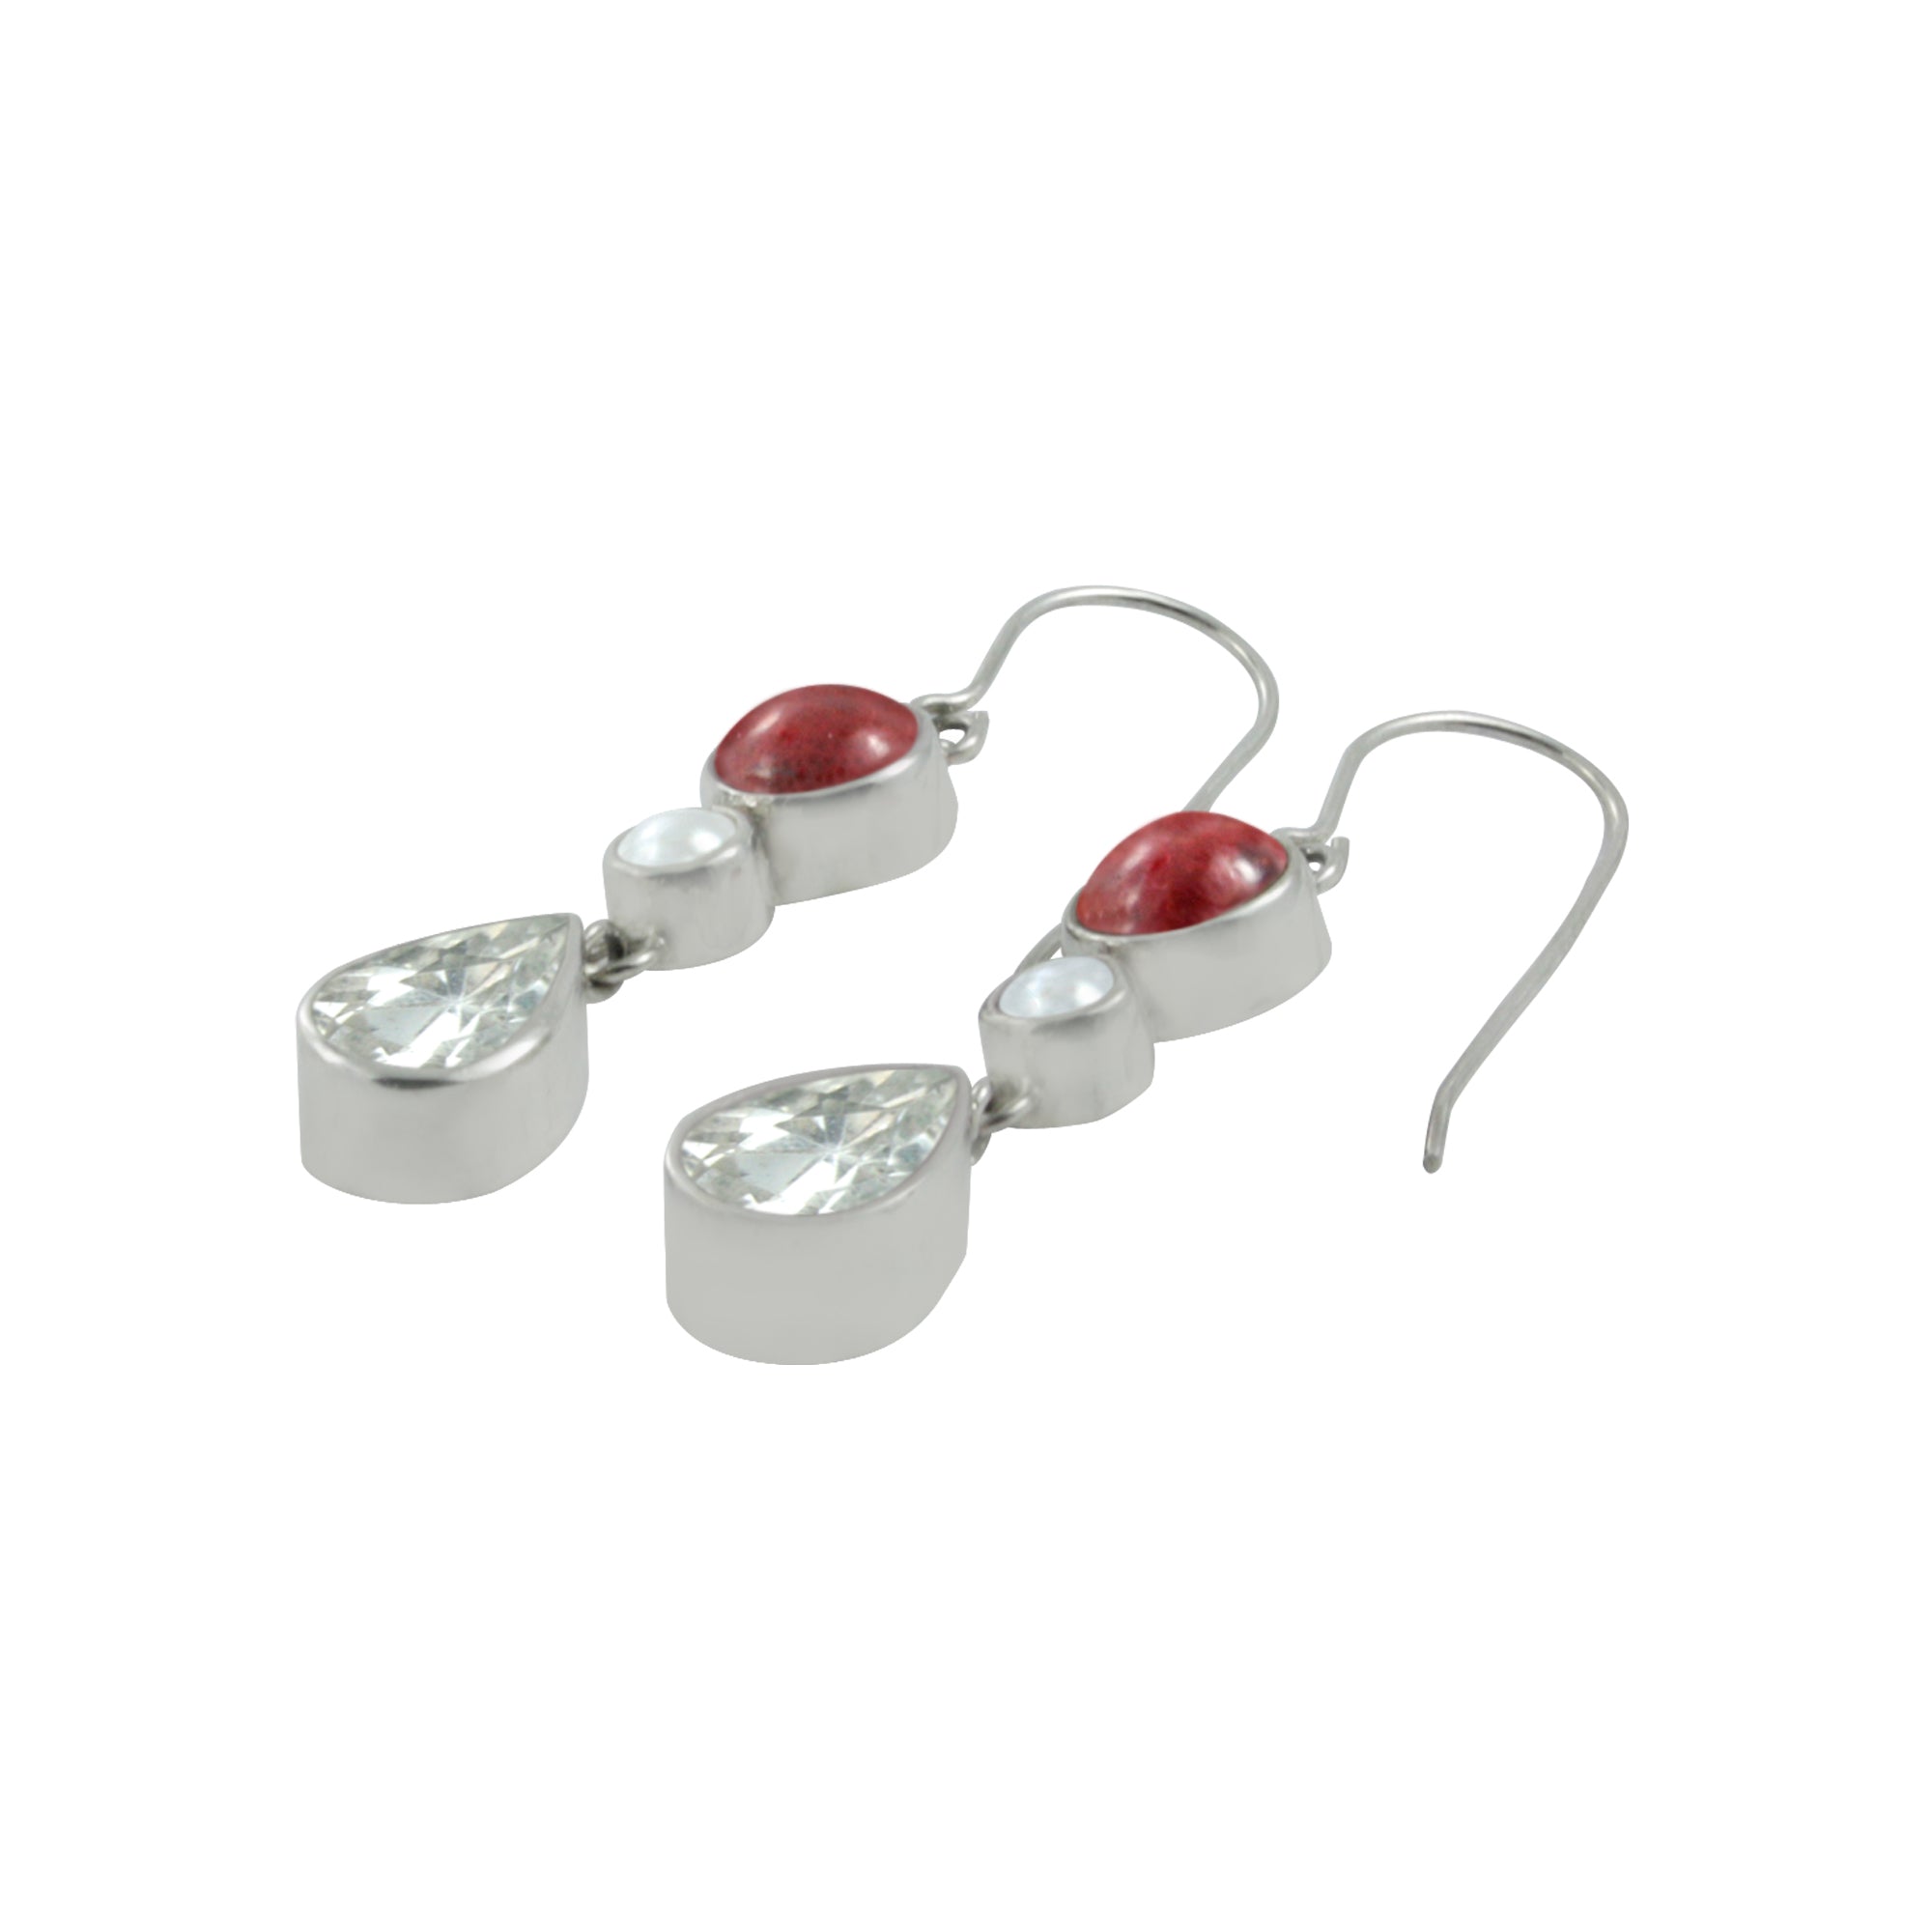 Get a little pizzazz in your life with these Coral, Pearl & White Topaz earrings!